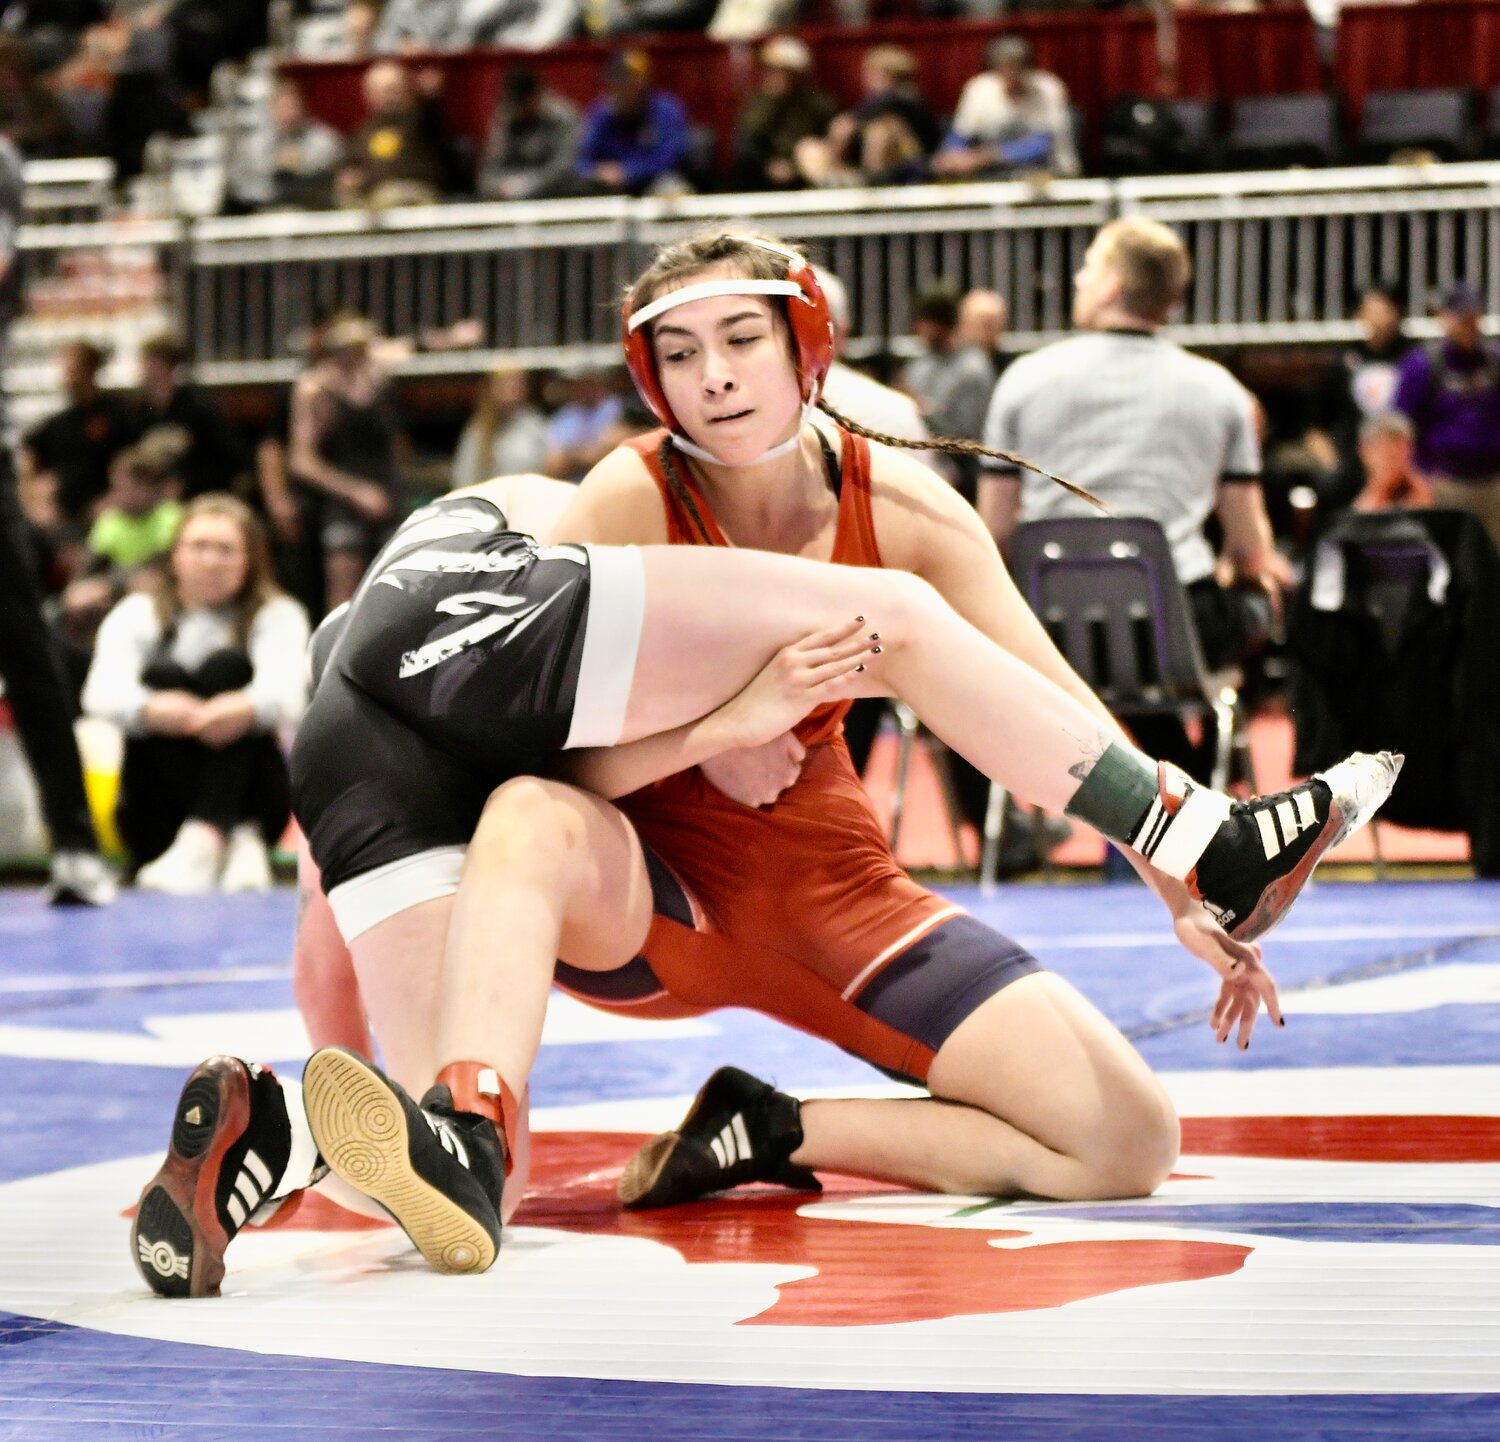 Lady Devil Leah Larkin finished fourth overall in the 125-pound class at the WHSAA Girls State Wrestling Championships in Casper.